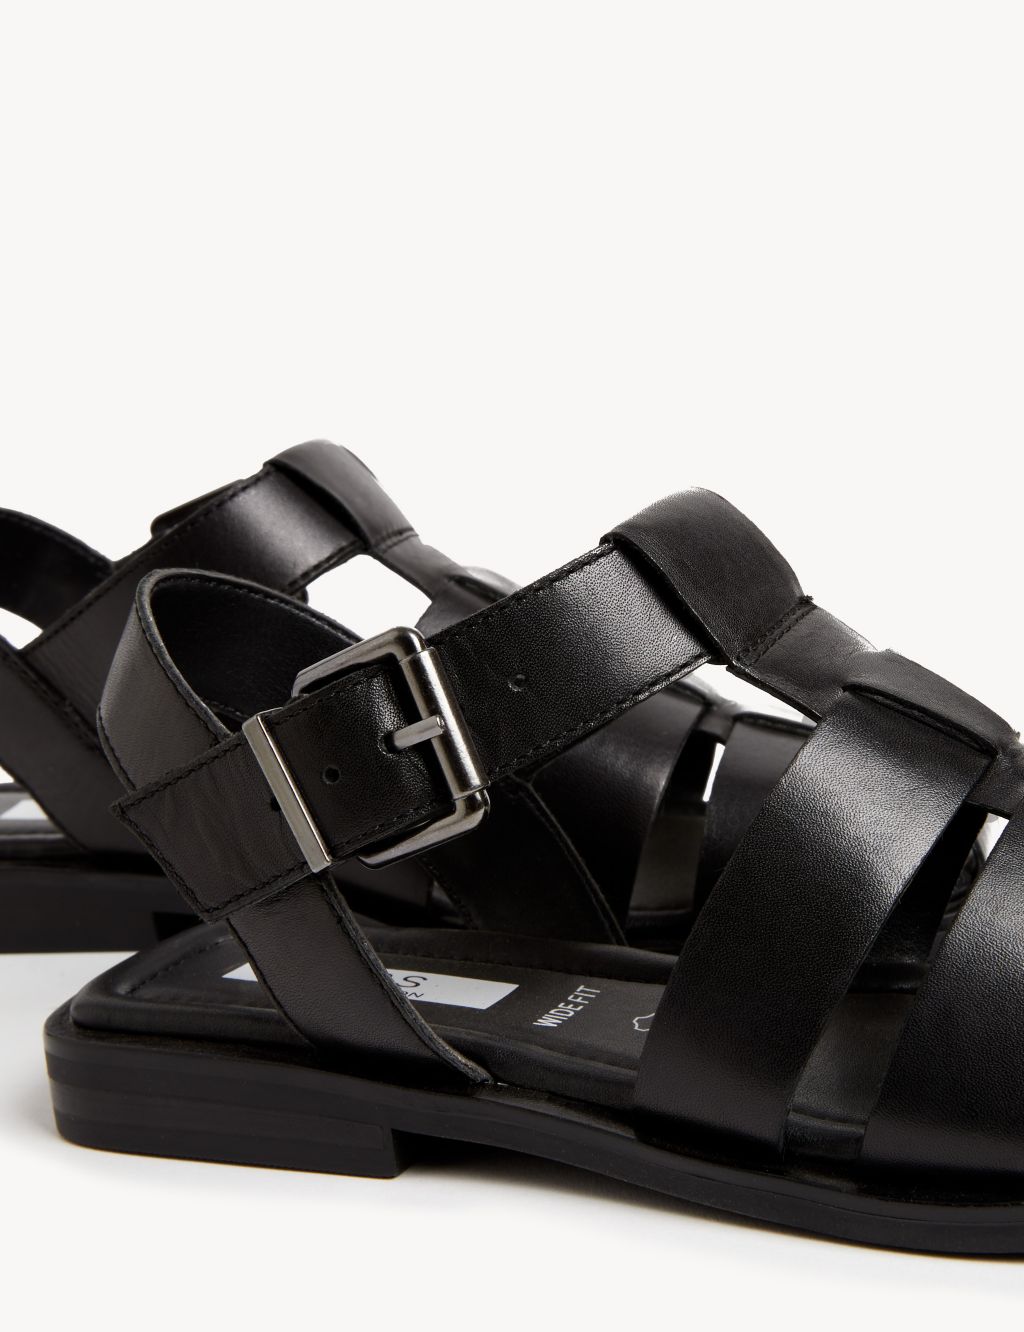 Wide Fit Leather Ankle Strap Flat Sandals image 2